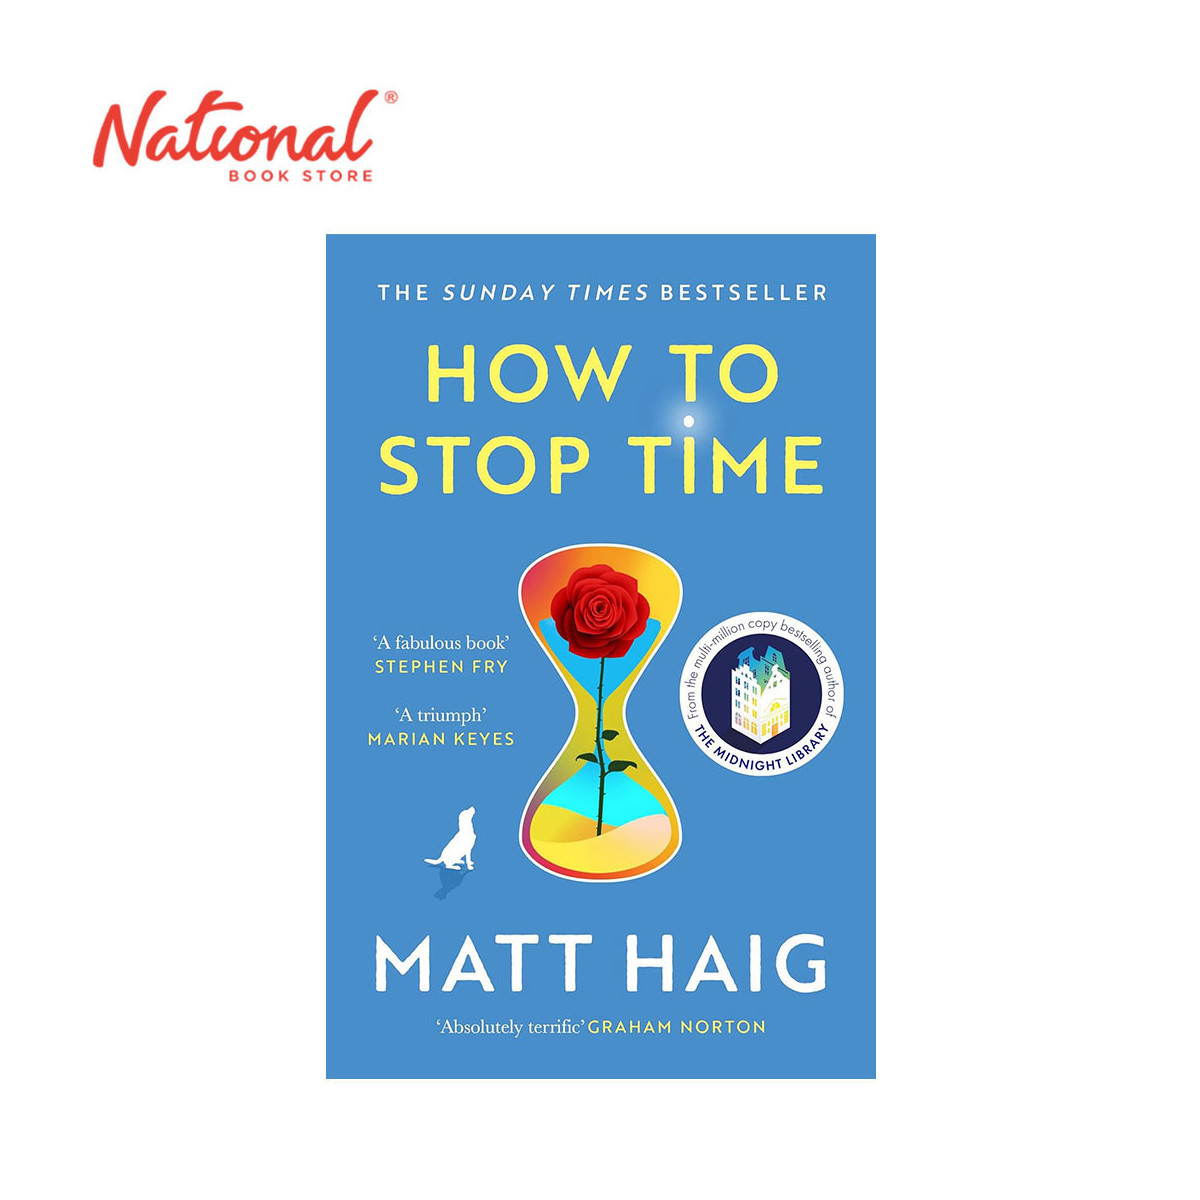 How To Stop Time by Matt Haig - Trade Paperback - Contemporary Fiction